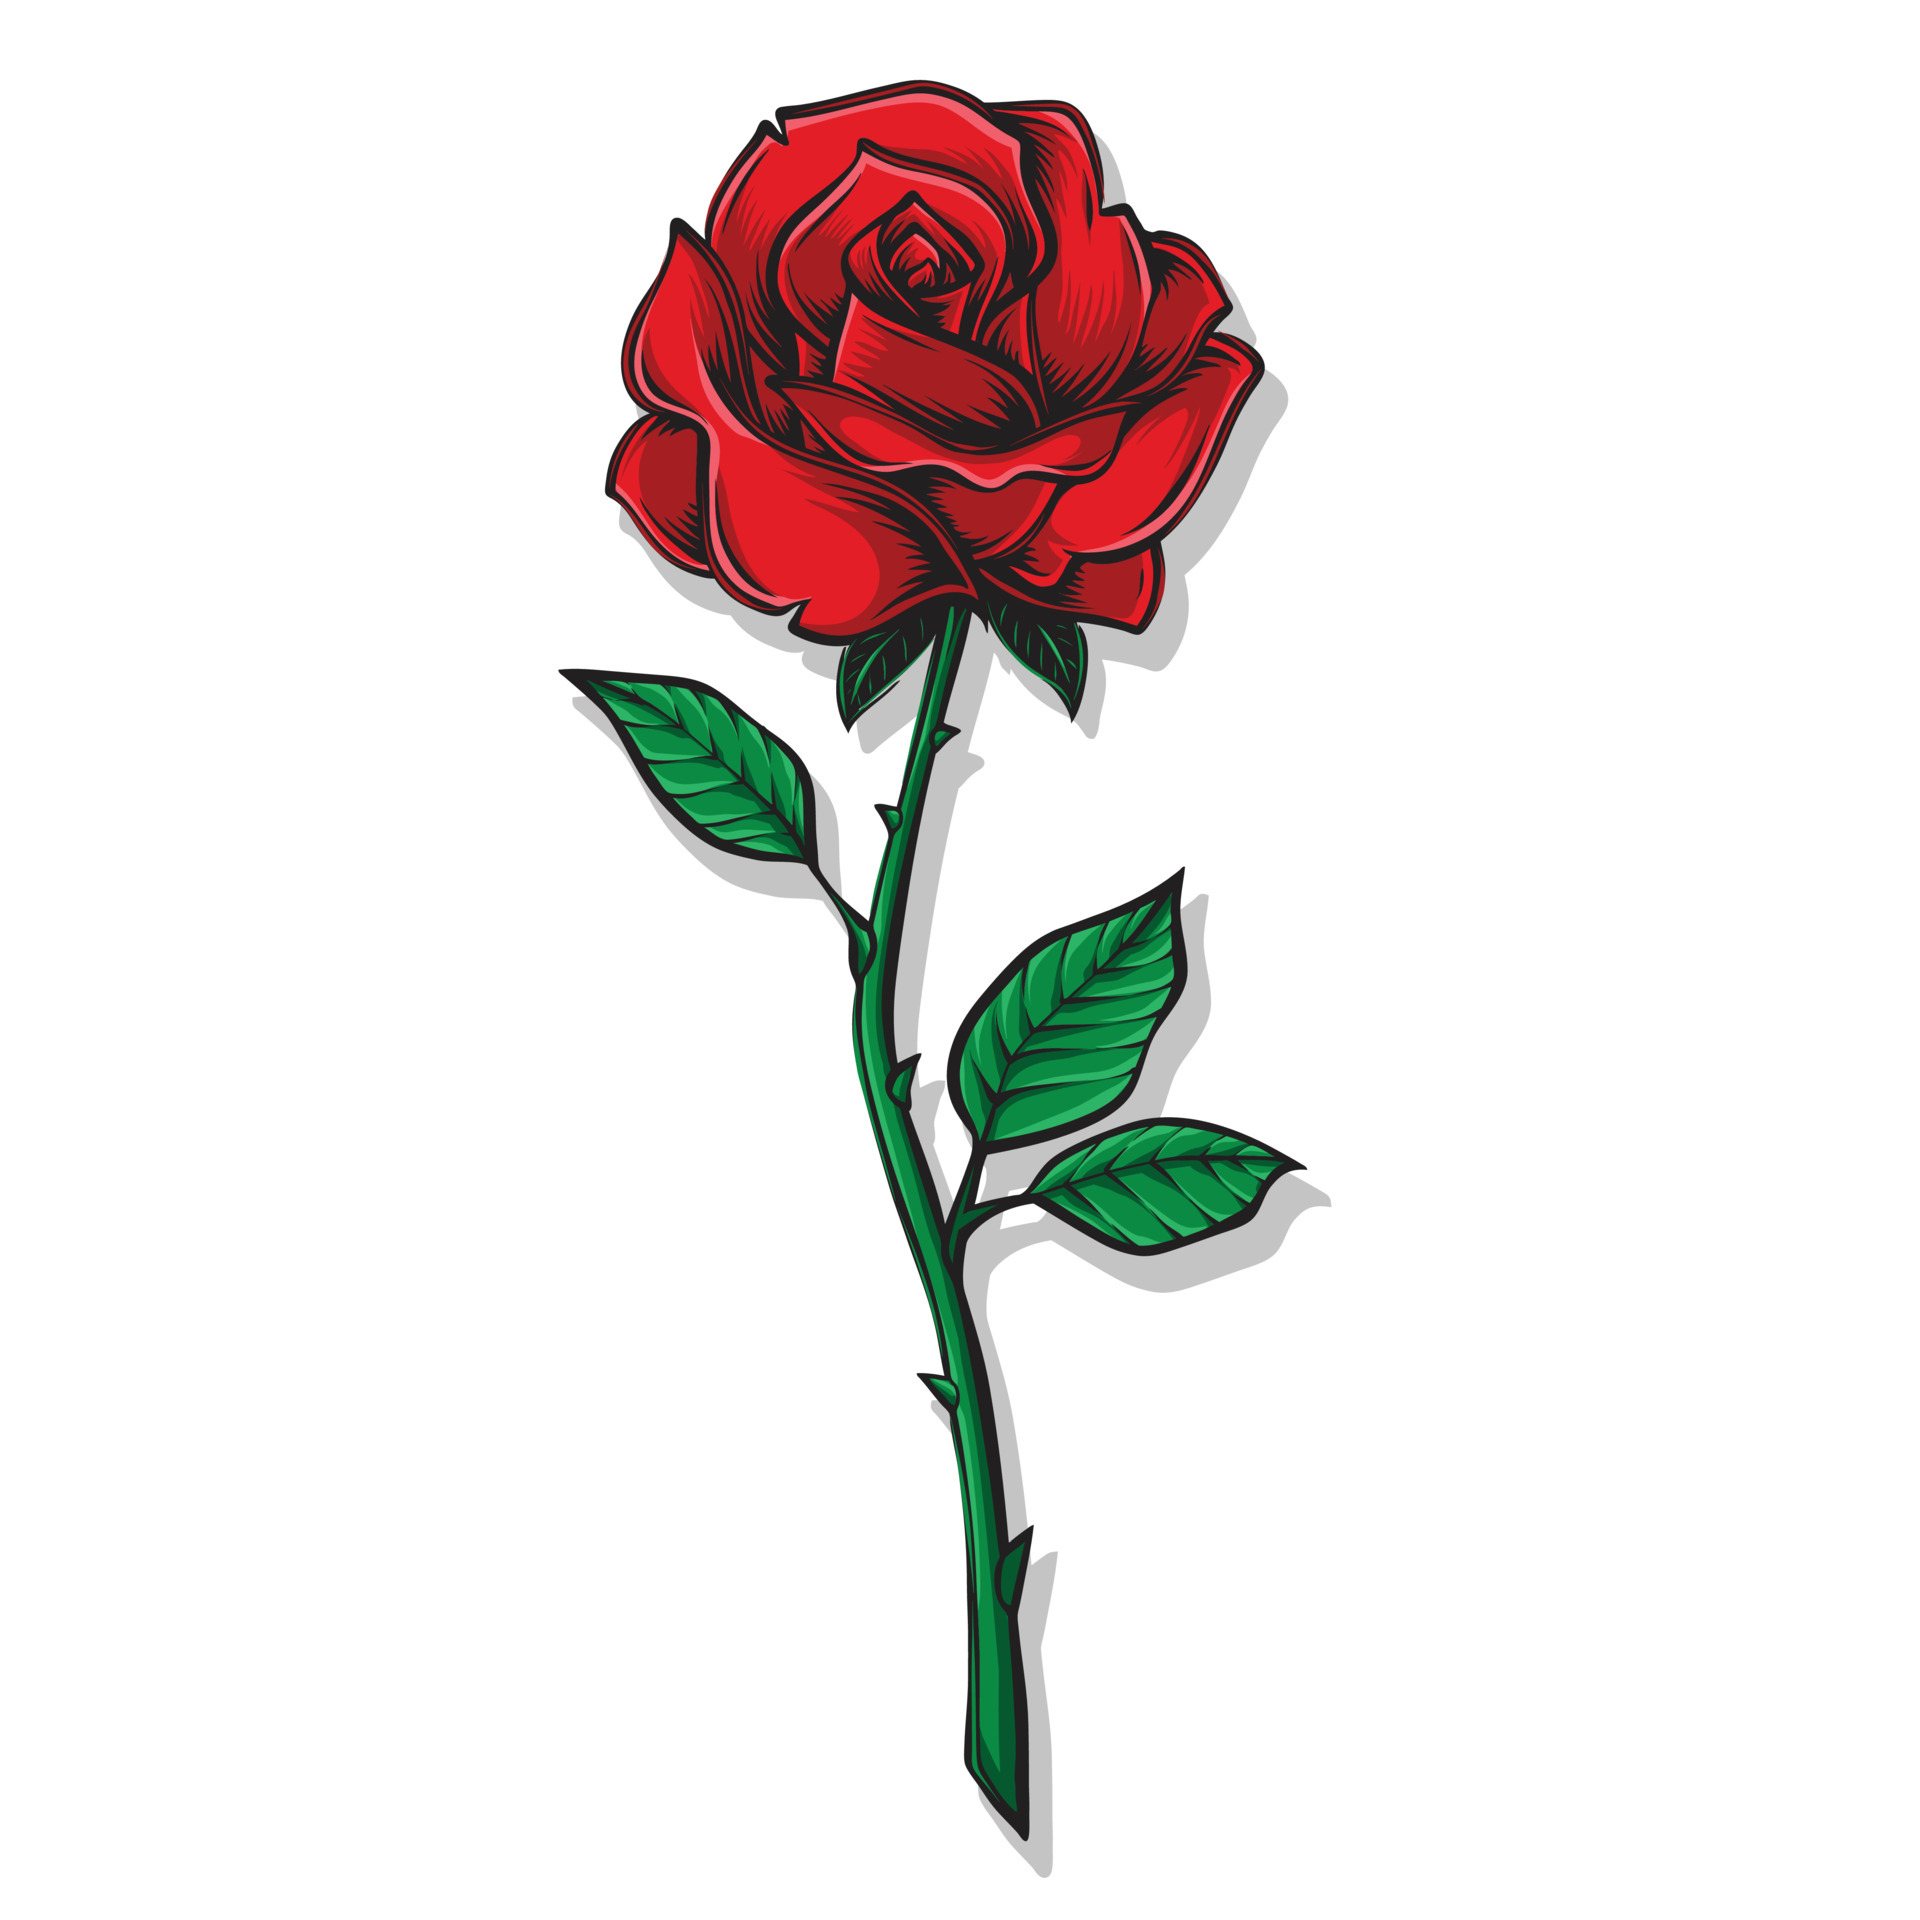 Rose Vector Art, Icons, and Graphics for Free Download